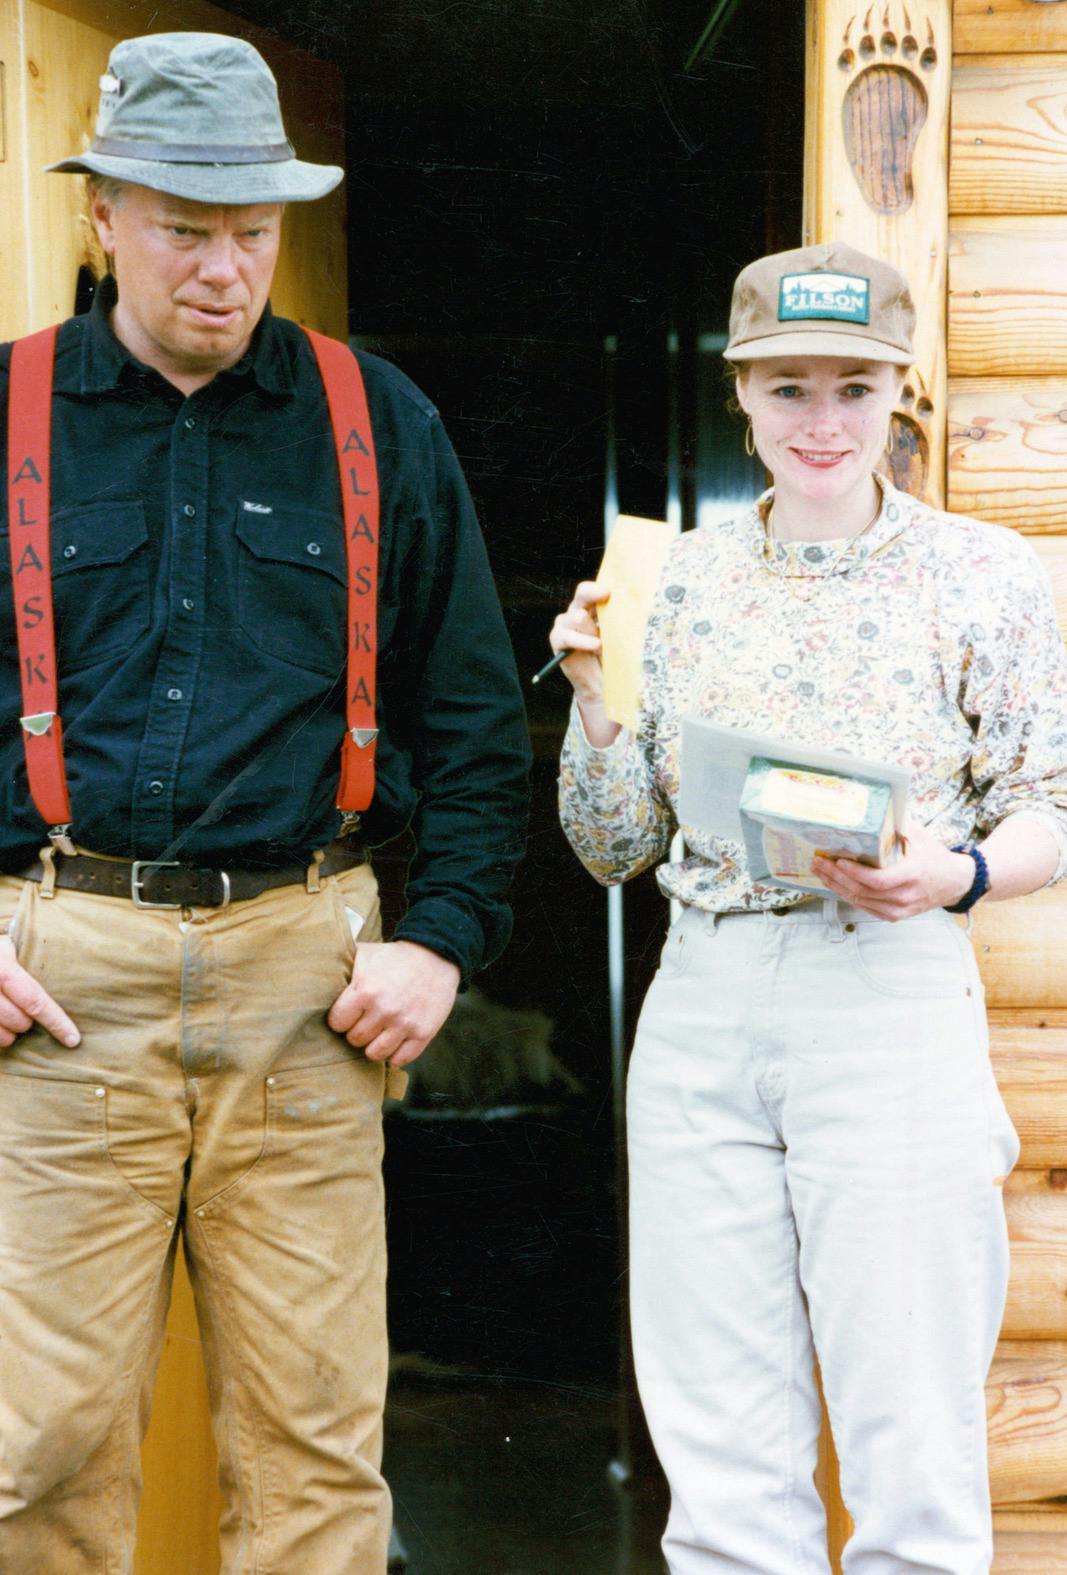 Steve & Vivian Moe in the early 90's, when they operated Deep Creek Fishing Club from the lighthouse.